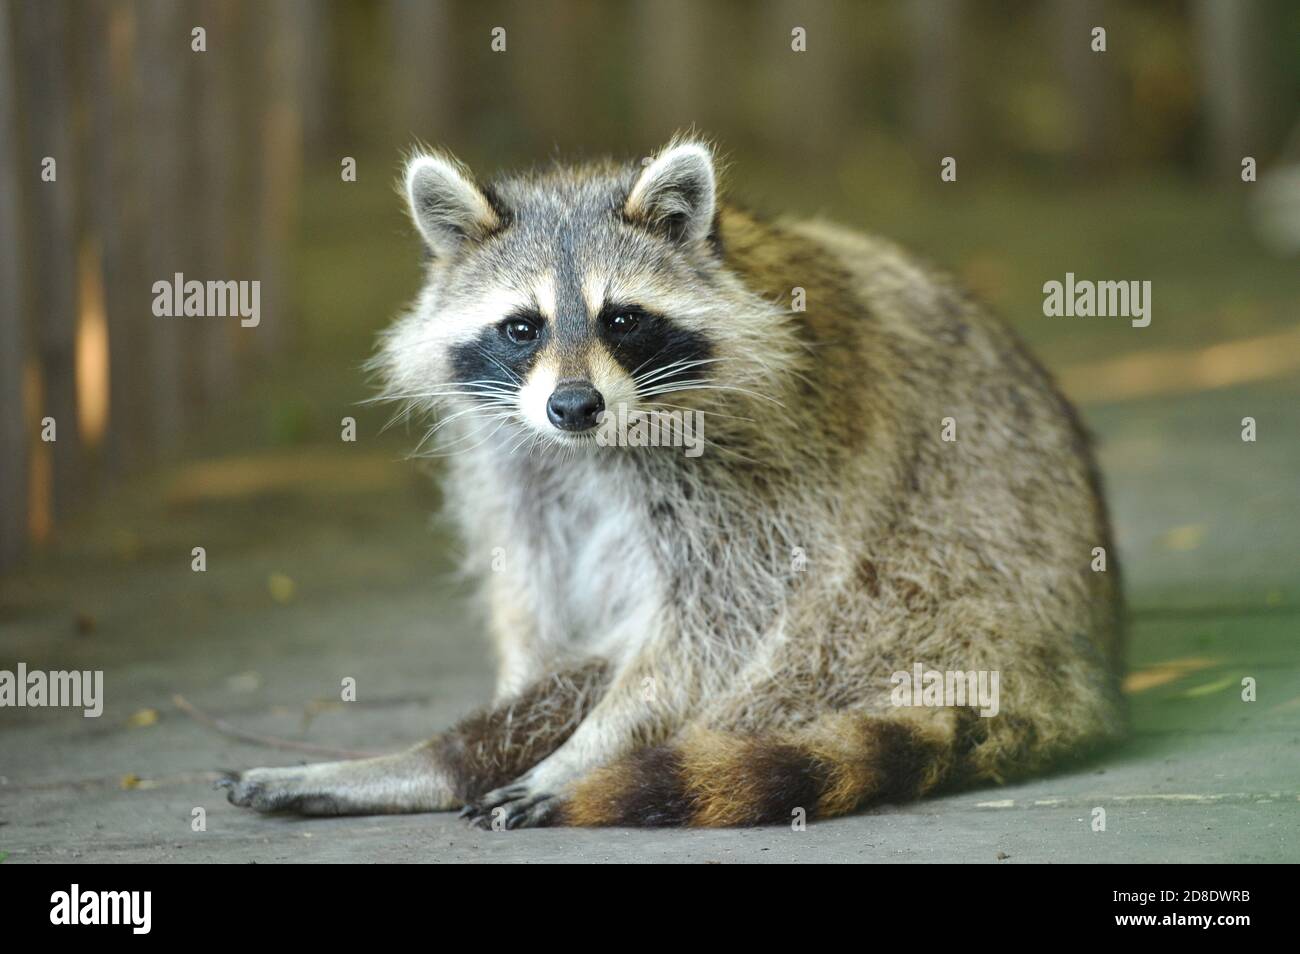 A raccoon looking and grooming itself Stock Photo